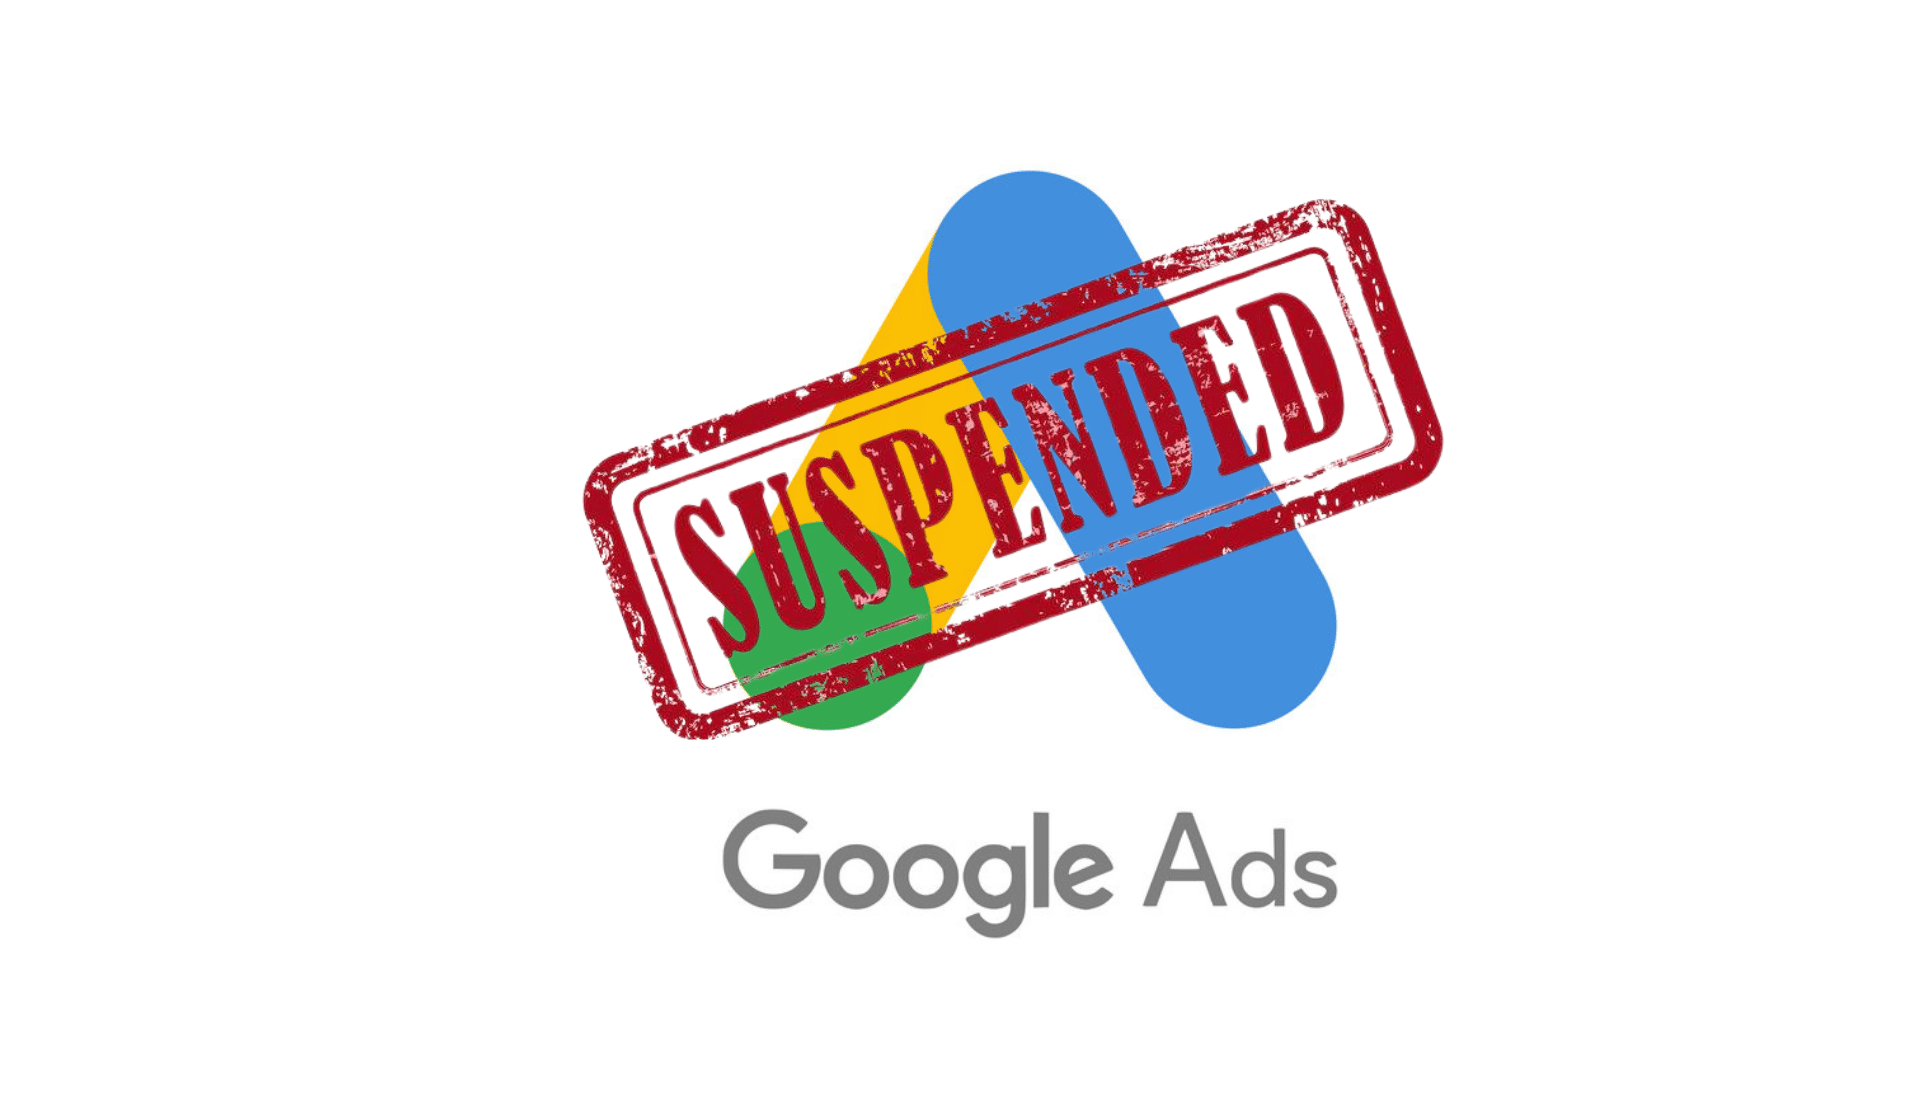 #Google limits functionality of suspended ads accounts